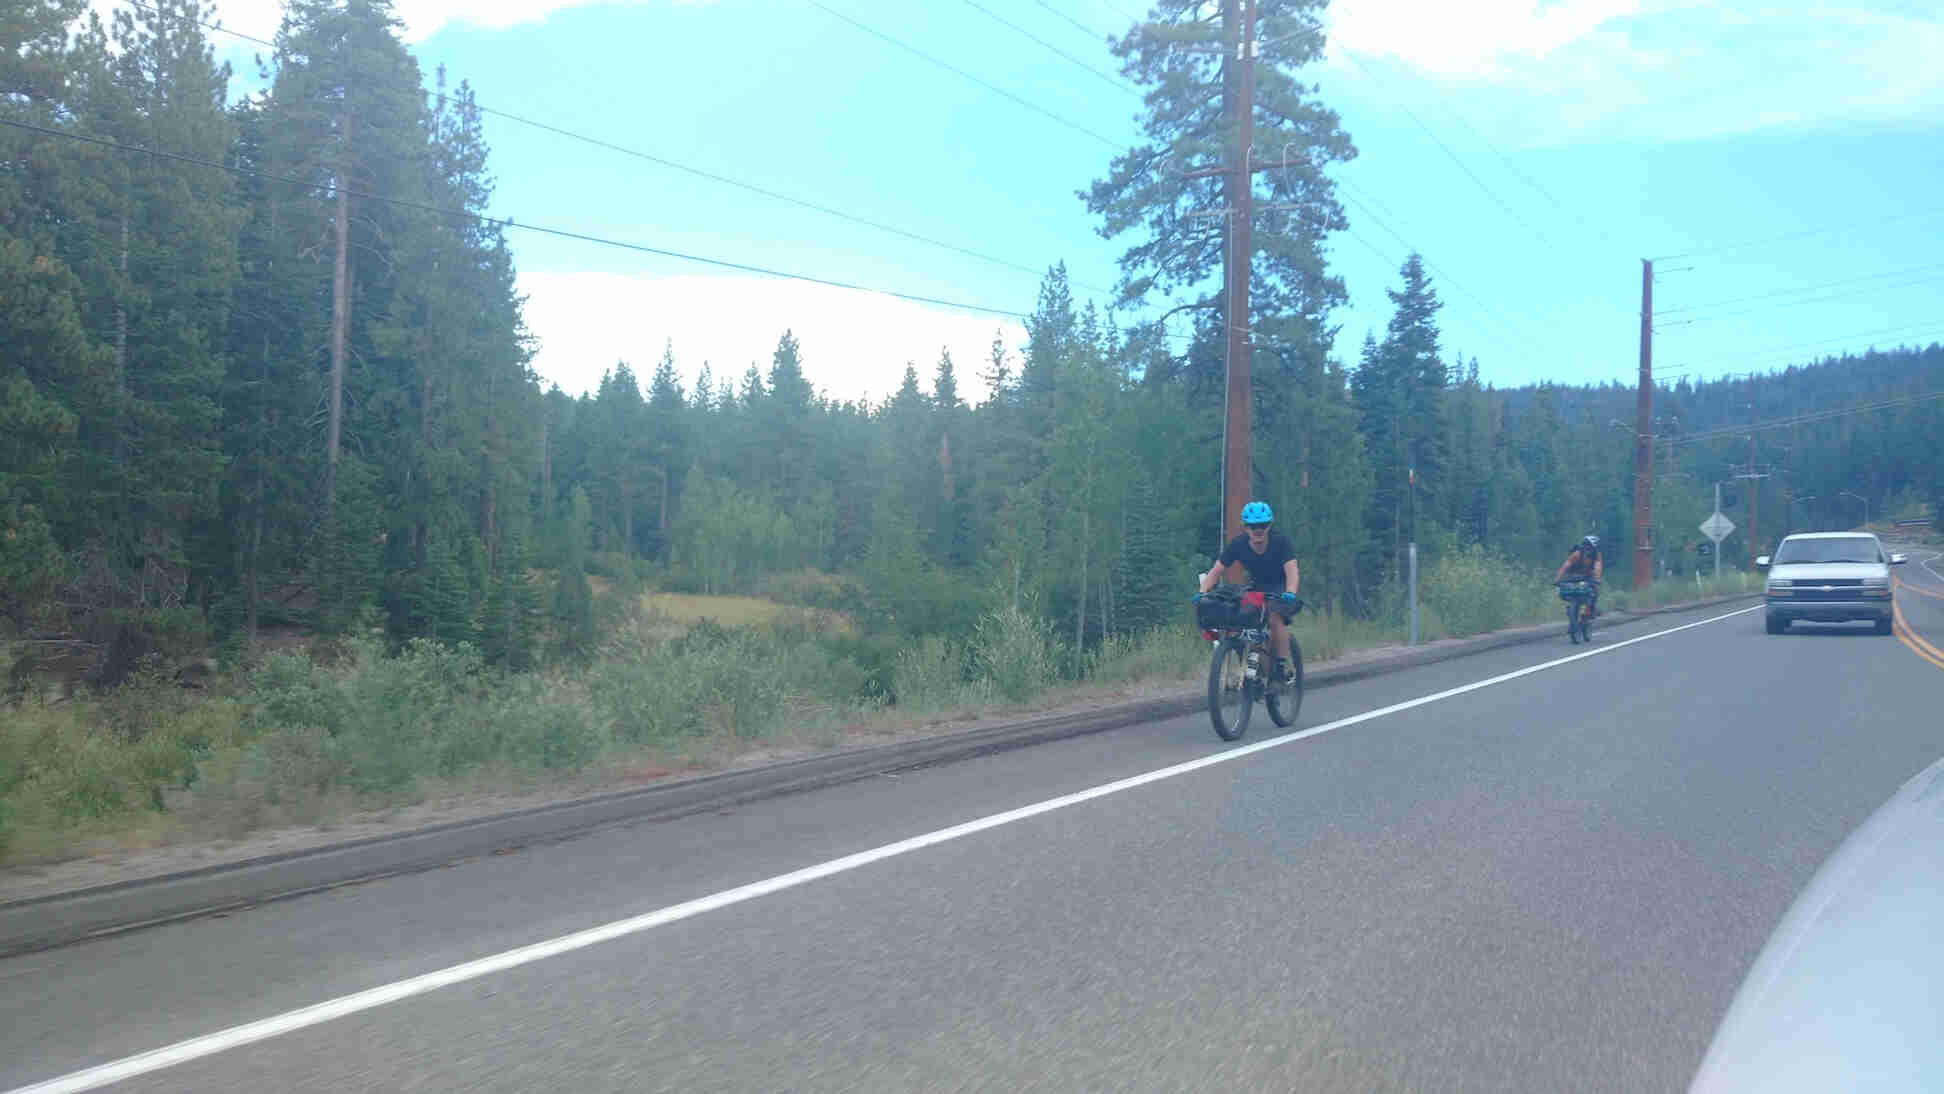 Cyclists riding on the shoulder of a paved road, with pine trees in the background